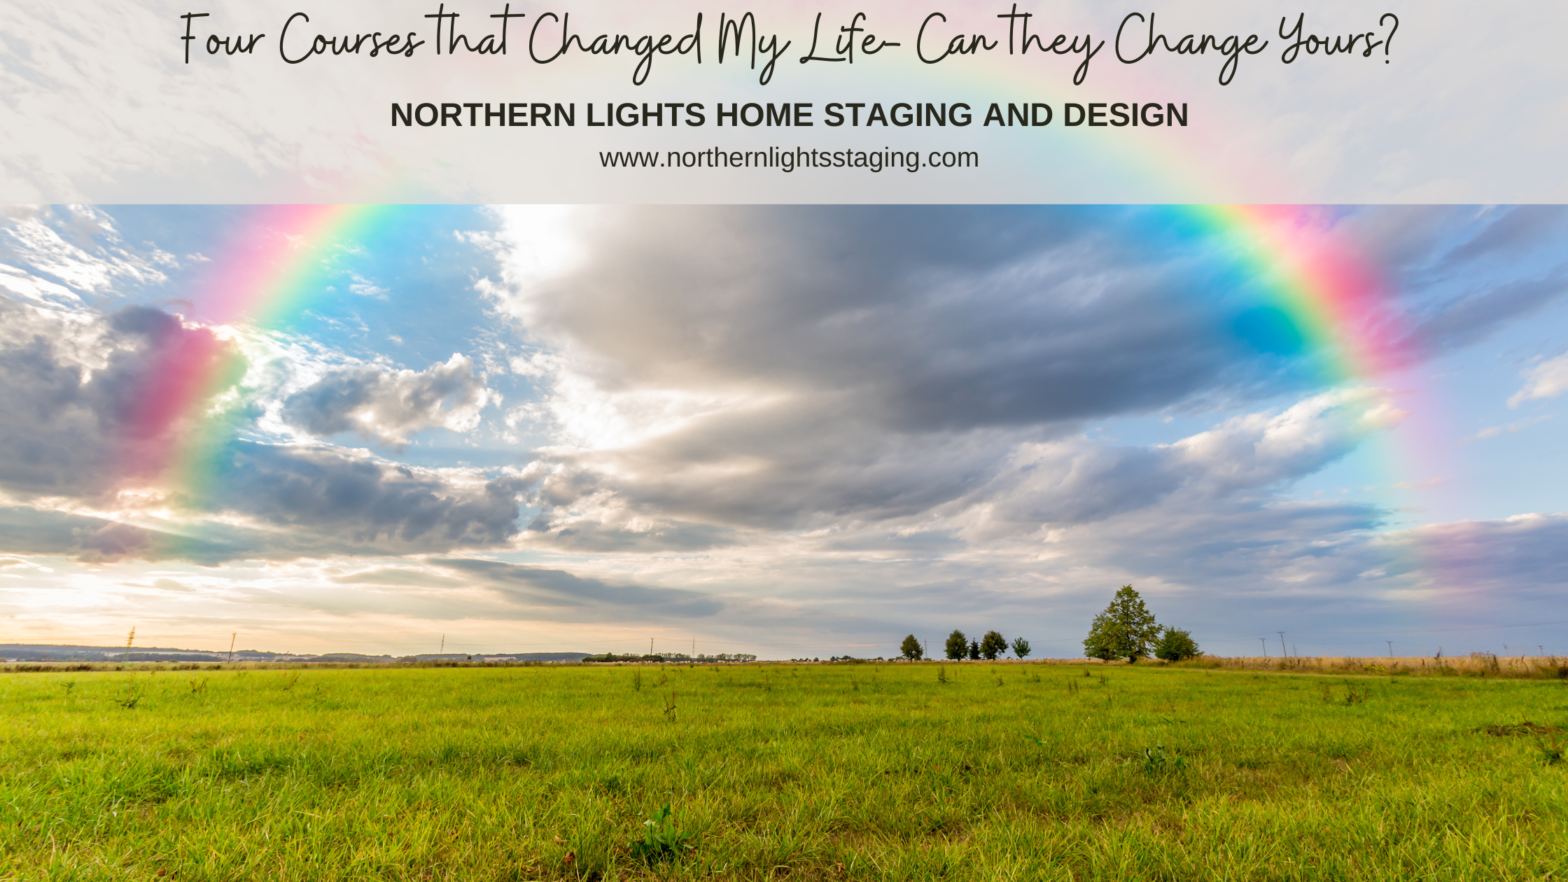 Four Courses that Changed My Life- Could They Change Yours?